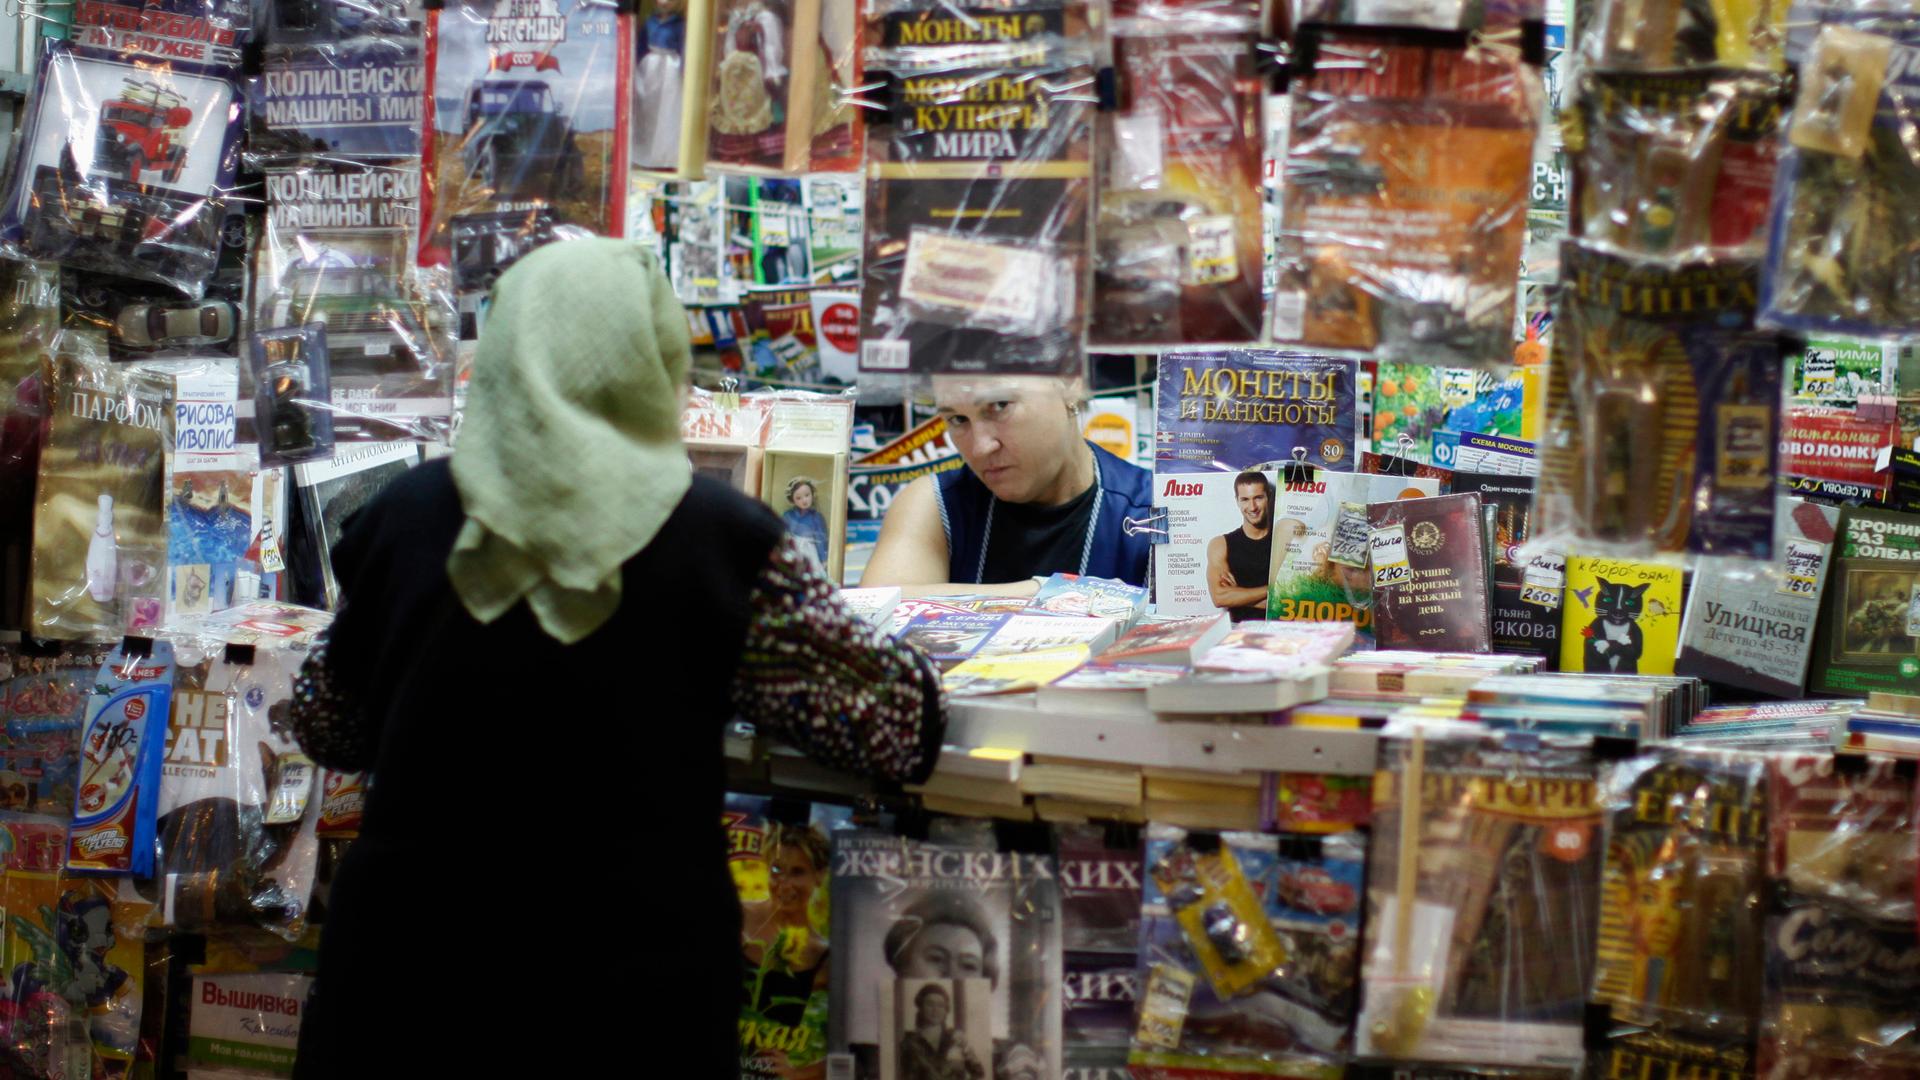 A woman works at a news-stand in the Moscow metro.